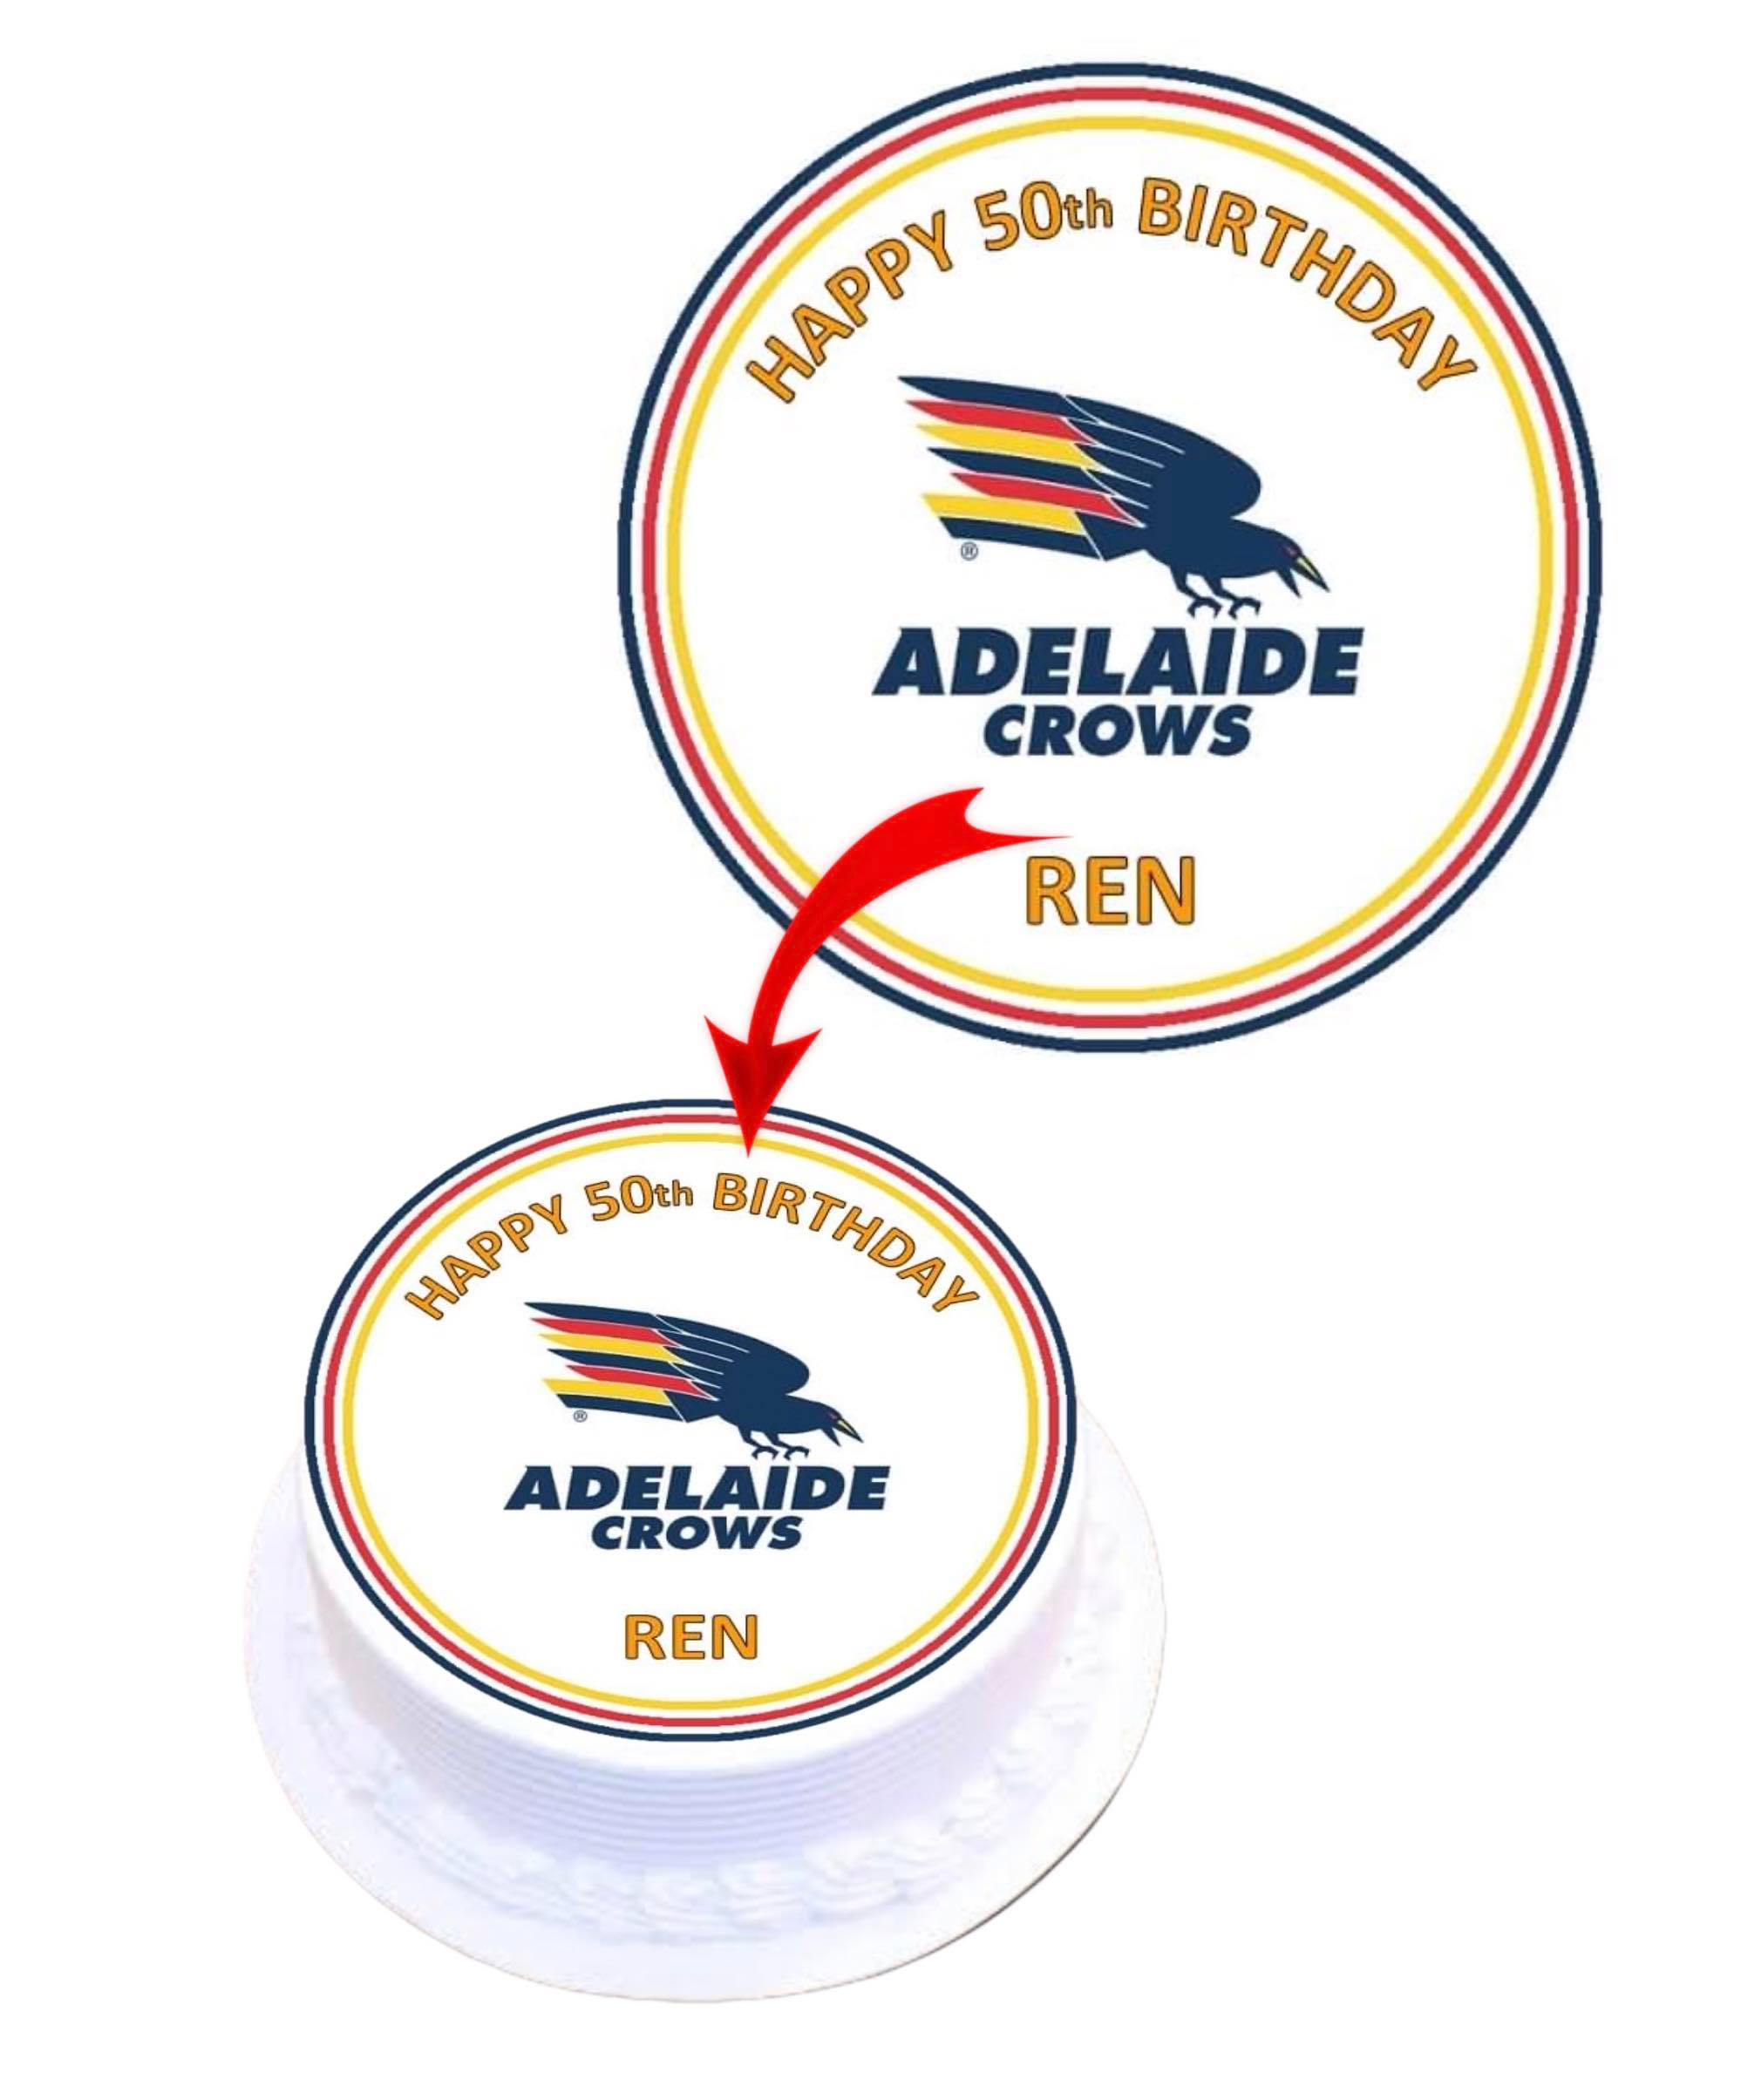 Top-rated cake decoration shops in cake decorations adelaide 